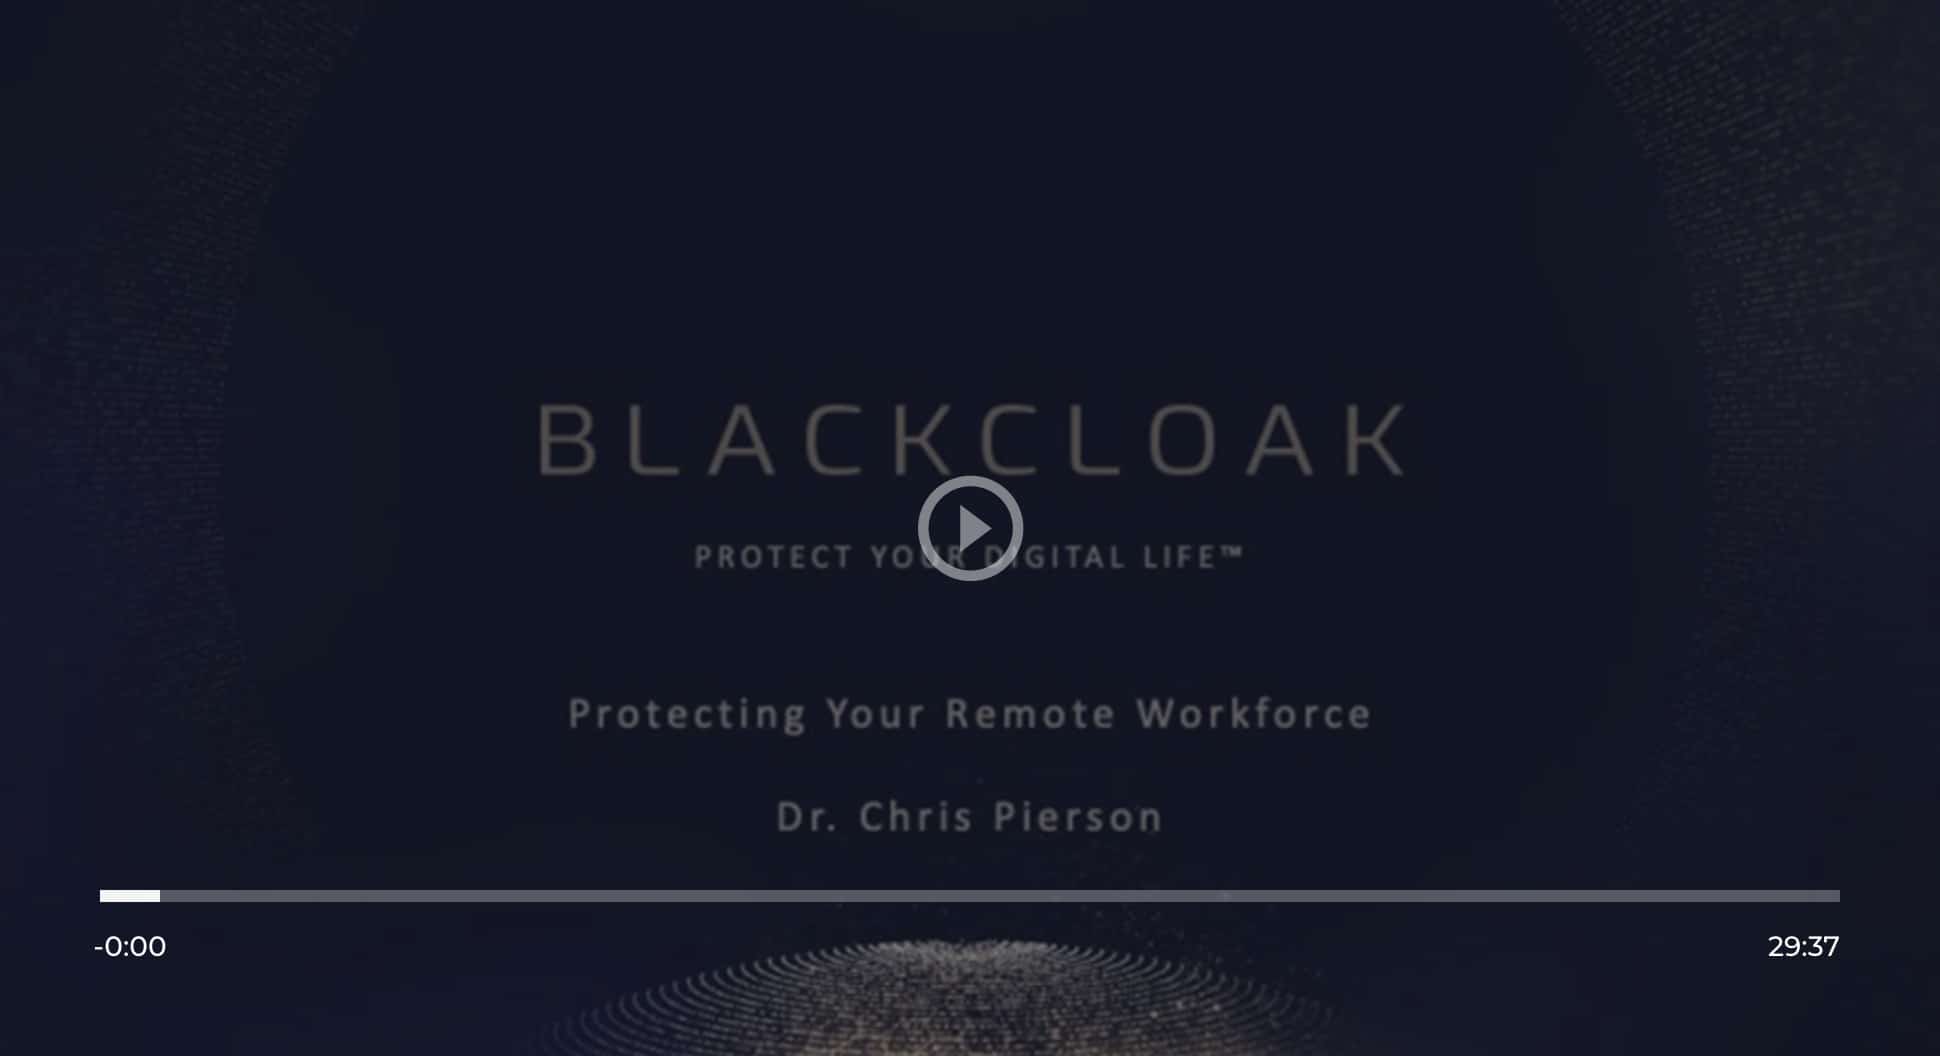 BlackCloak Video: protecting your remote workforce